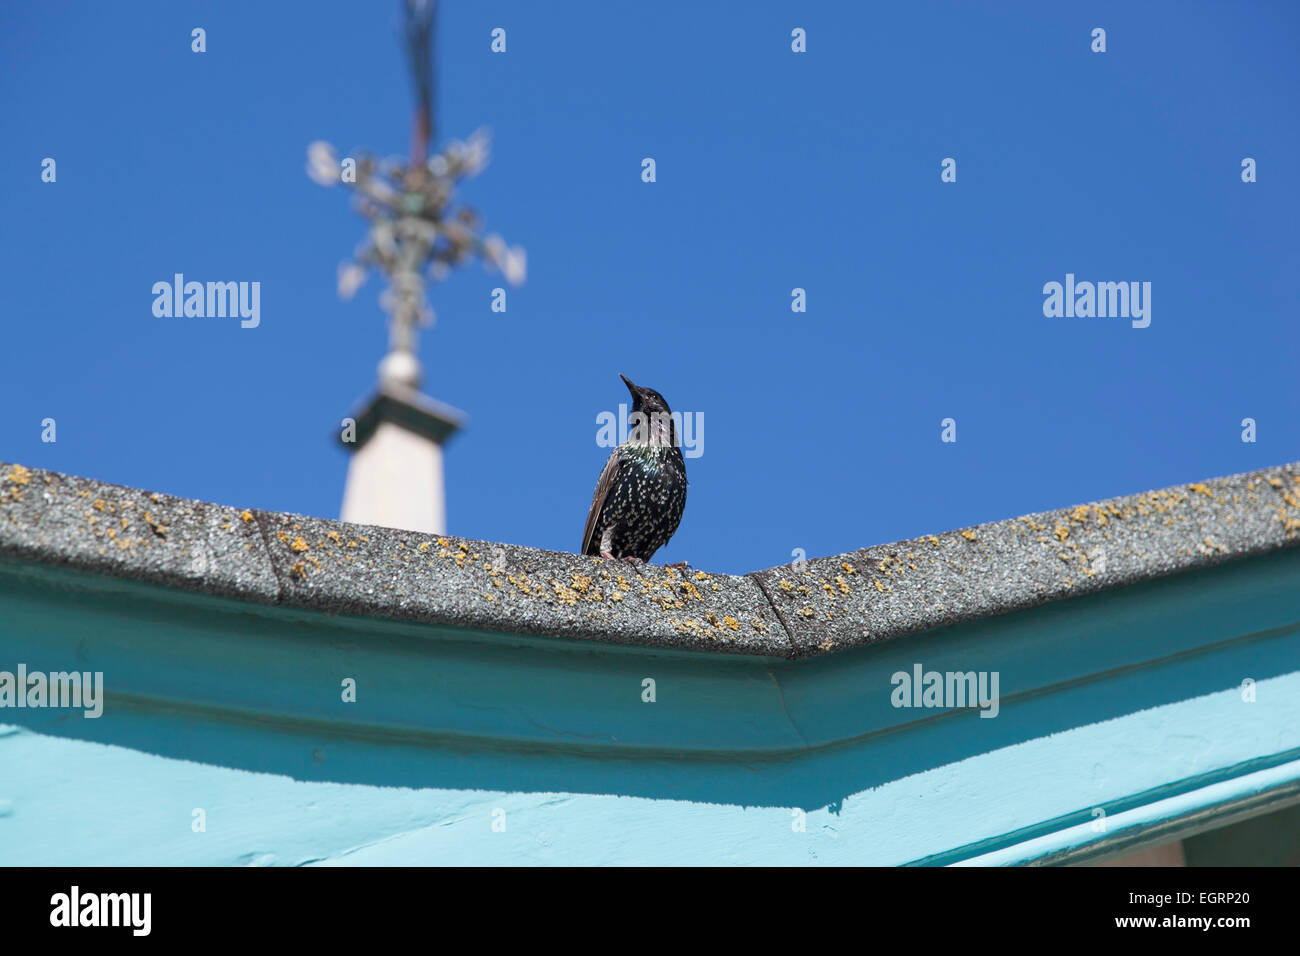 Starling bird sitting on a roof in Weston-super-Mare, Somerset, England Stock Photo